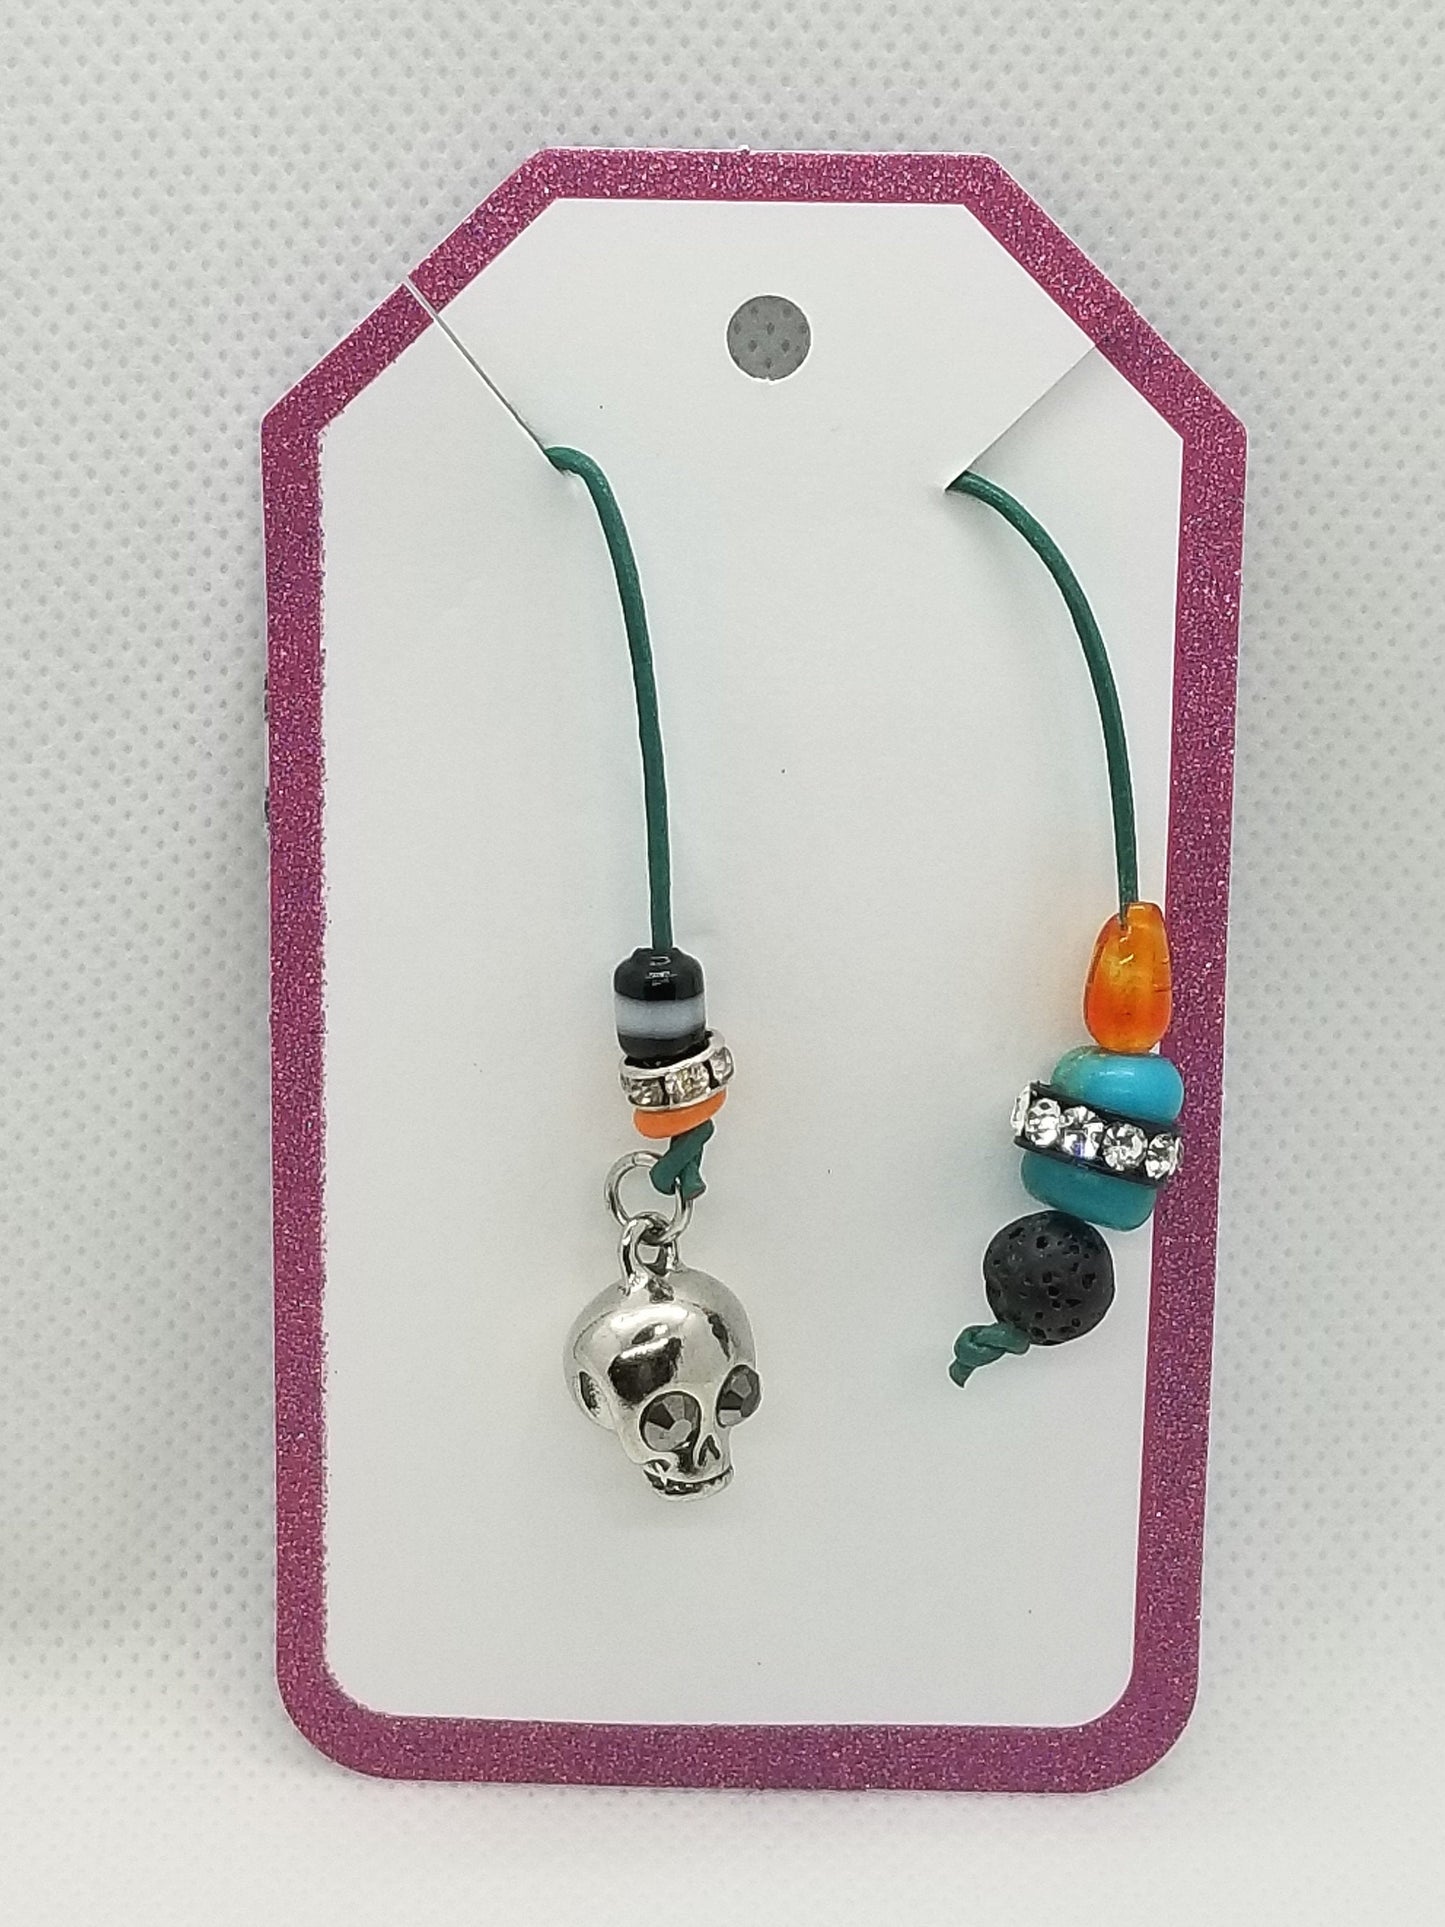 Bookmark for Planner, Bullet Journal, or Traveler Notebook - Skull Charm with Lava Stone and Beads